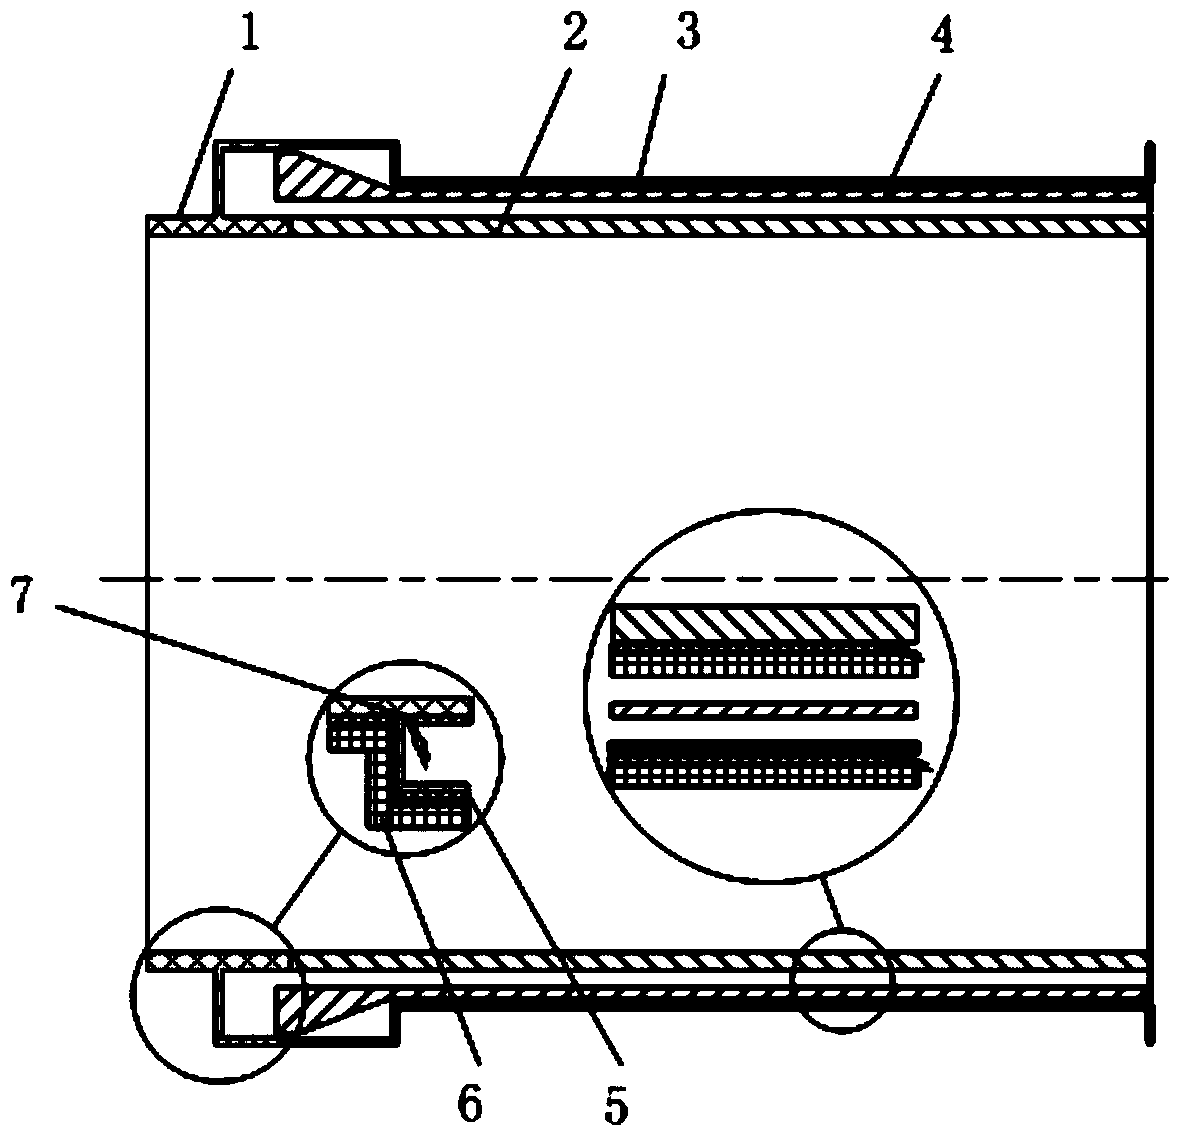 Indirect thermal control device for high resolution optical remote sensor precision temperature control